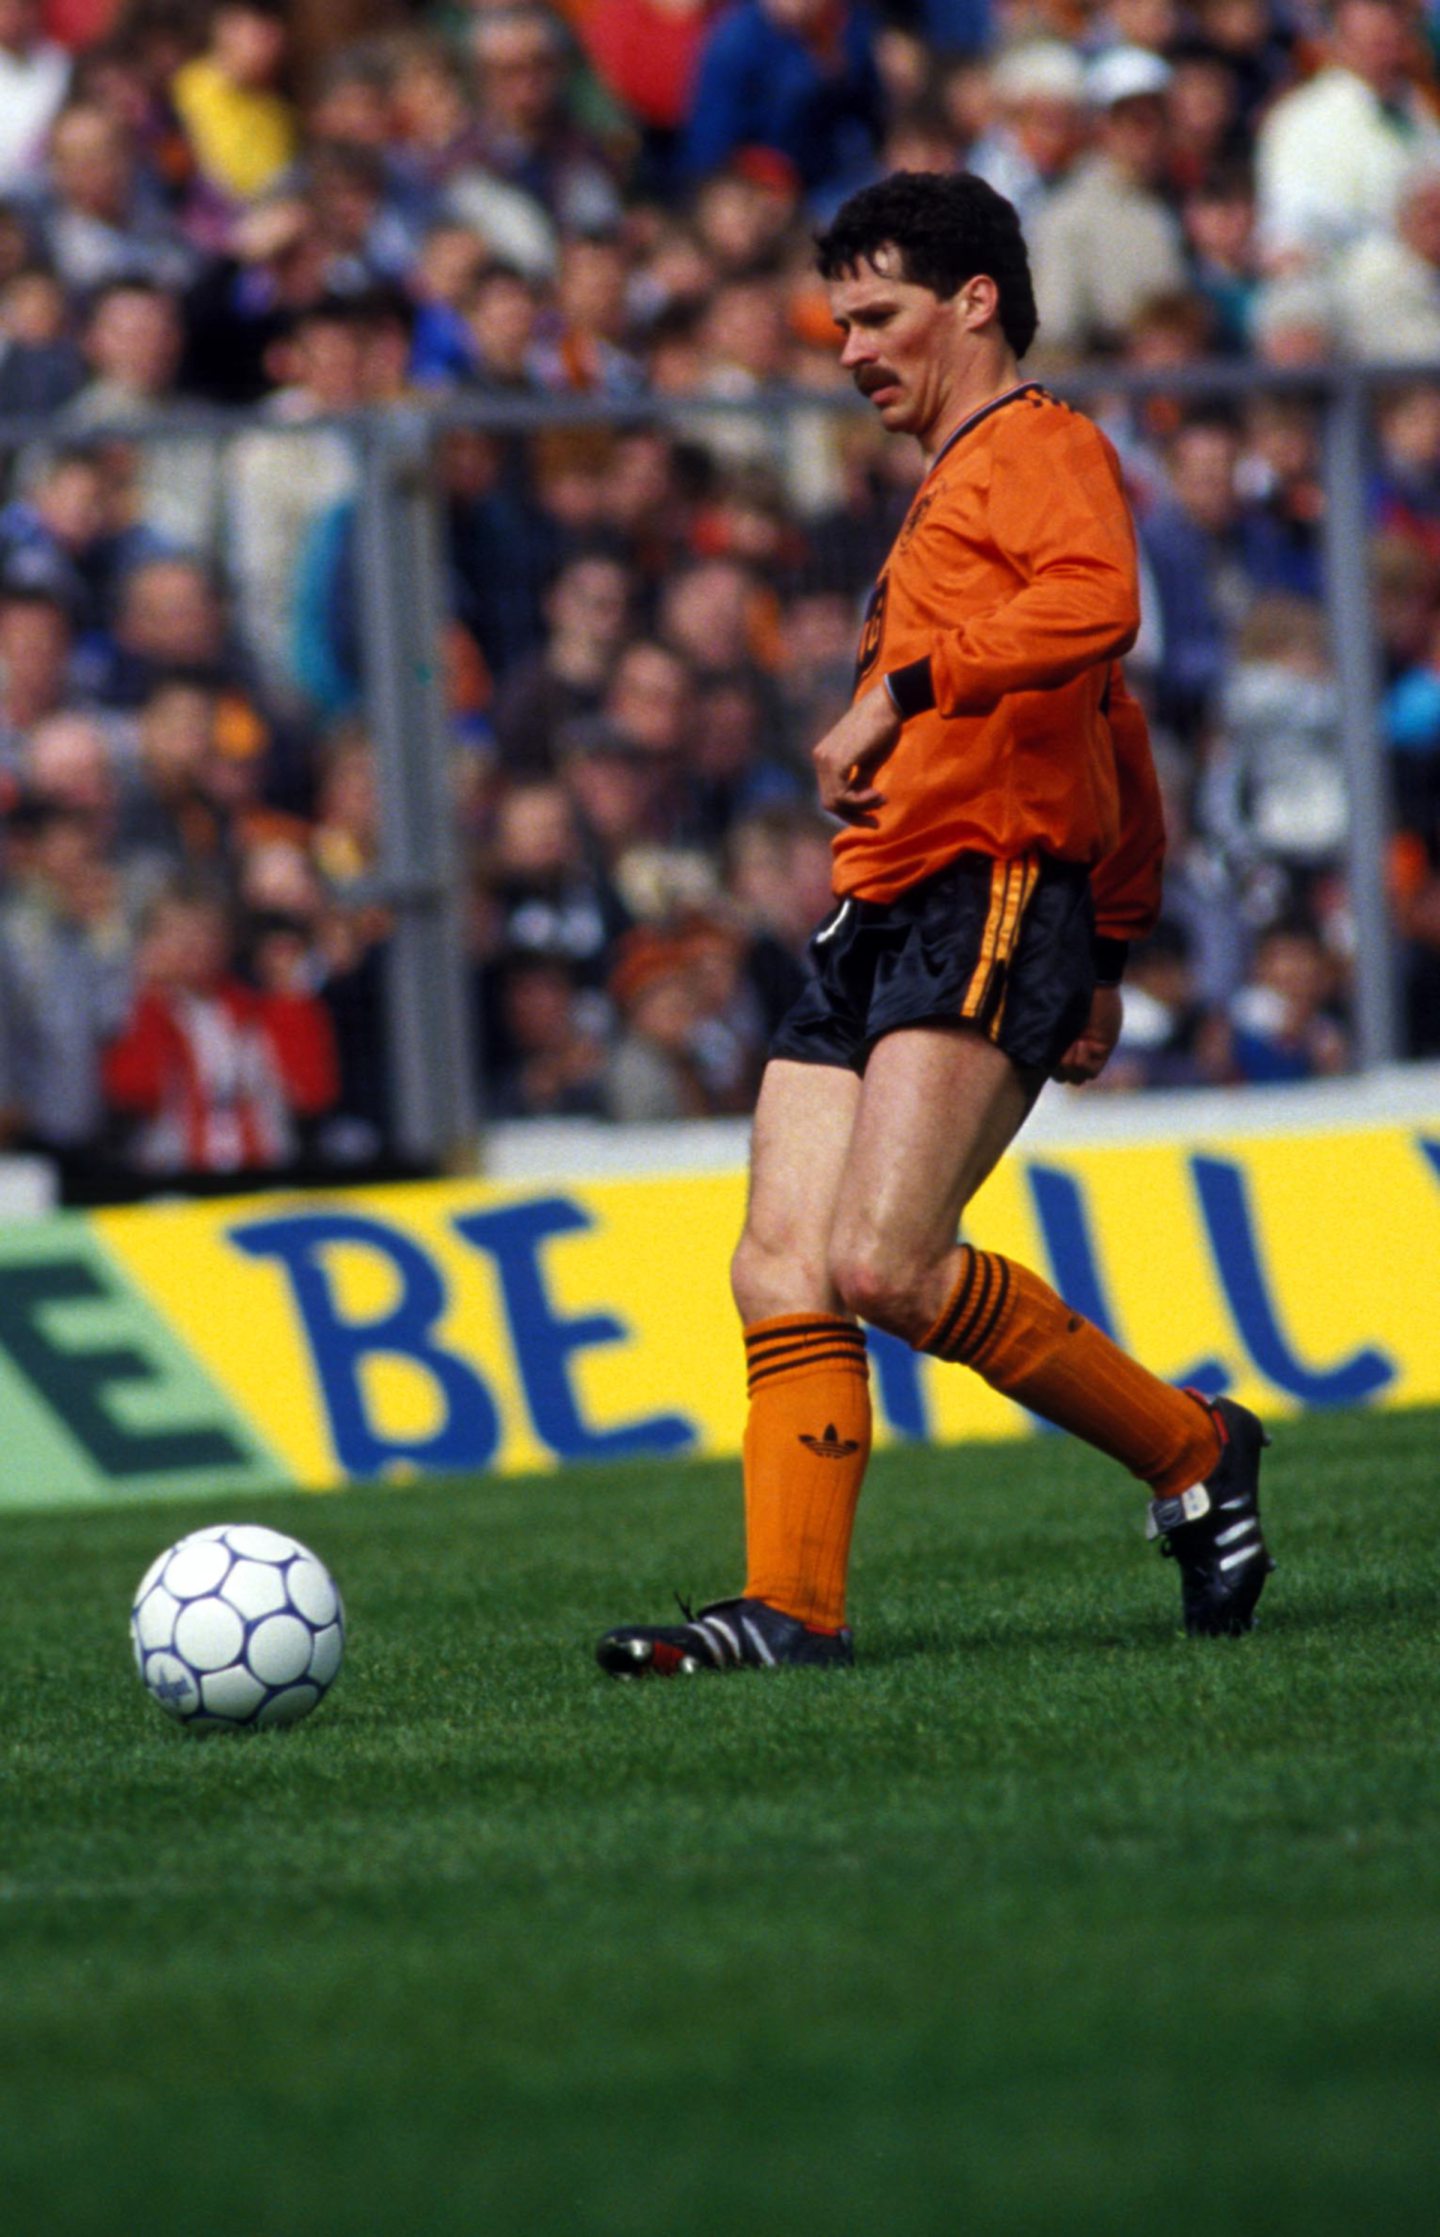 John Holt in action for Dundee United against St Mirren in 1987 Scottish Cup Final.